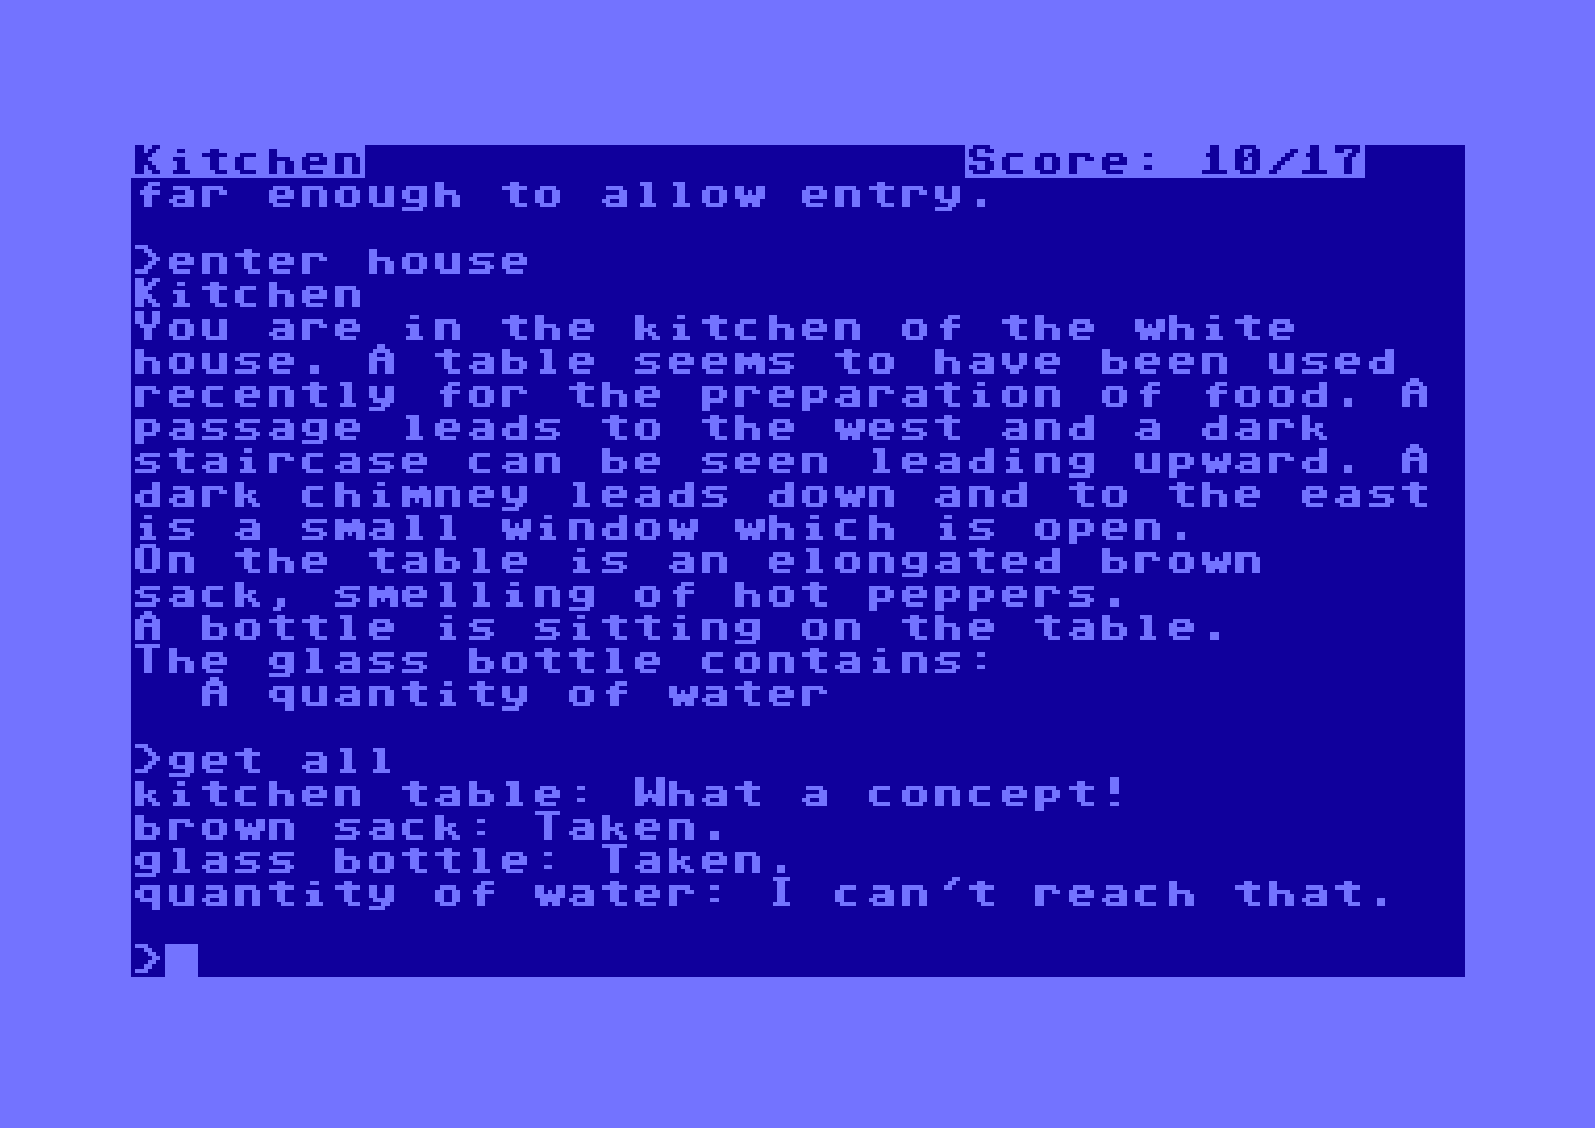 Snap of the Commodore 64 version of Zork I, a computer text adventure game by Infocom 1982